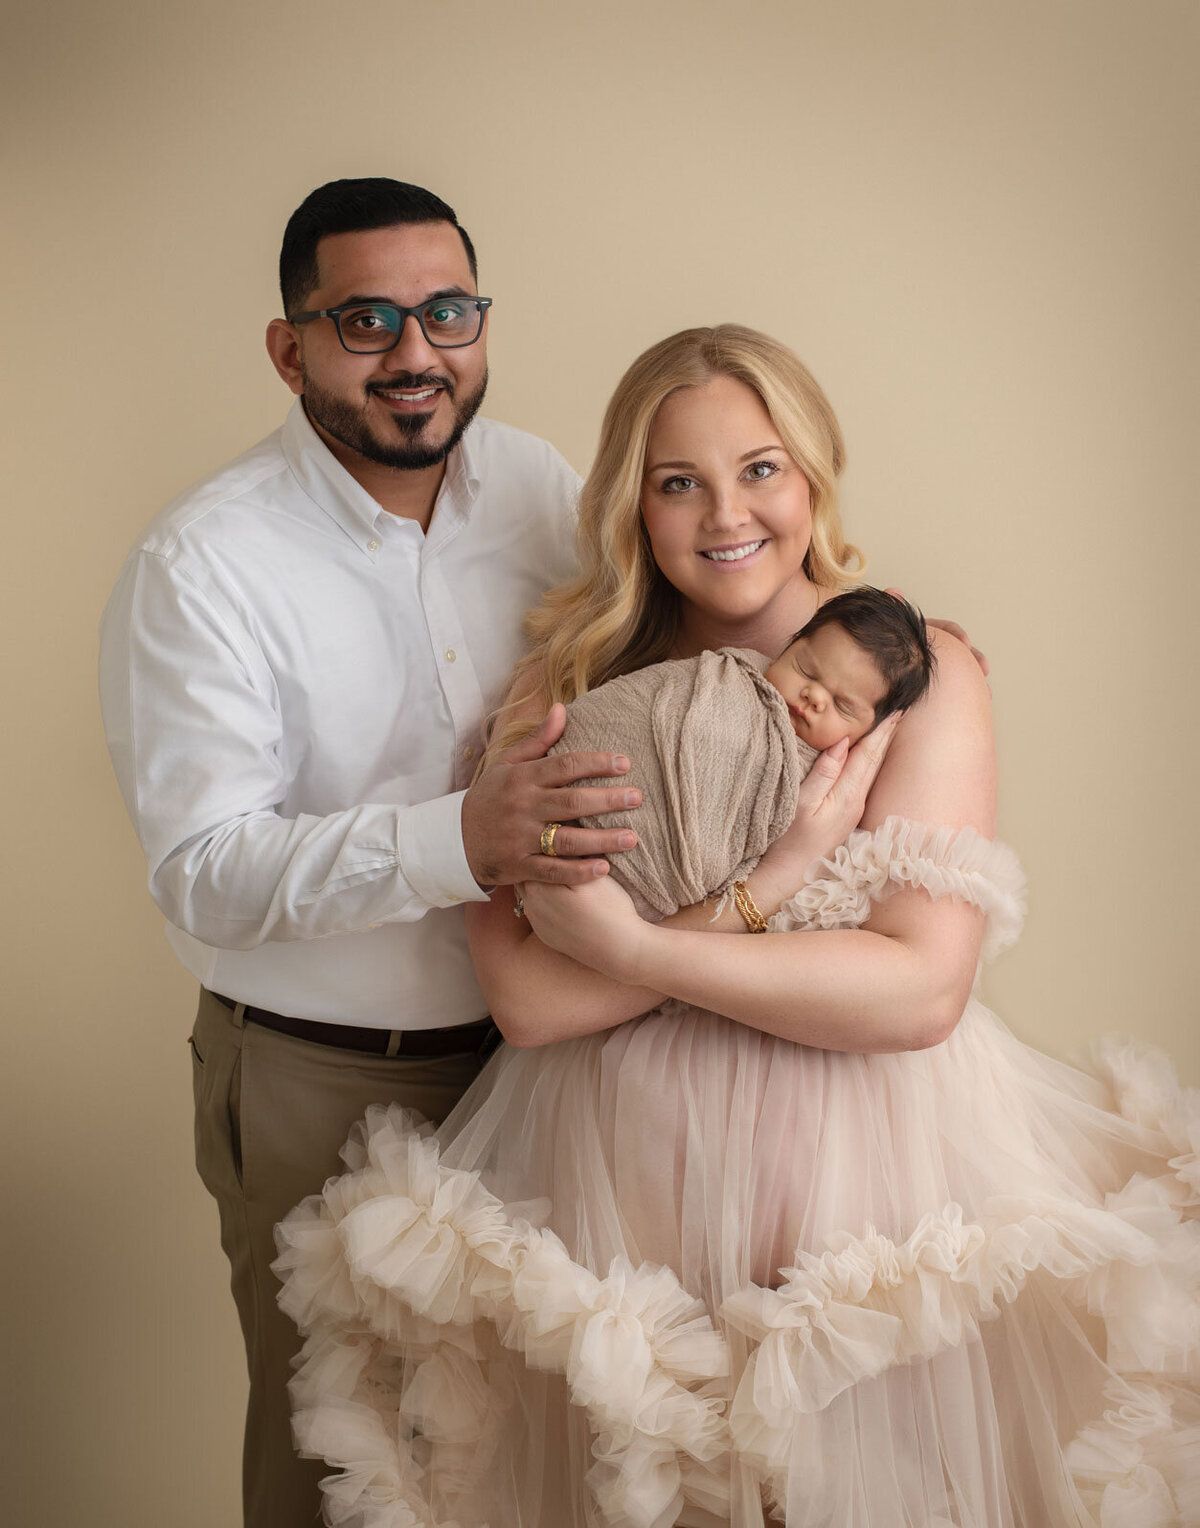 mom and dad dressed up and holding newborn with neutral background